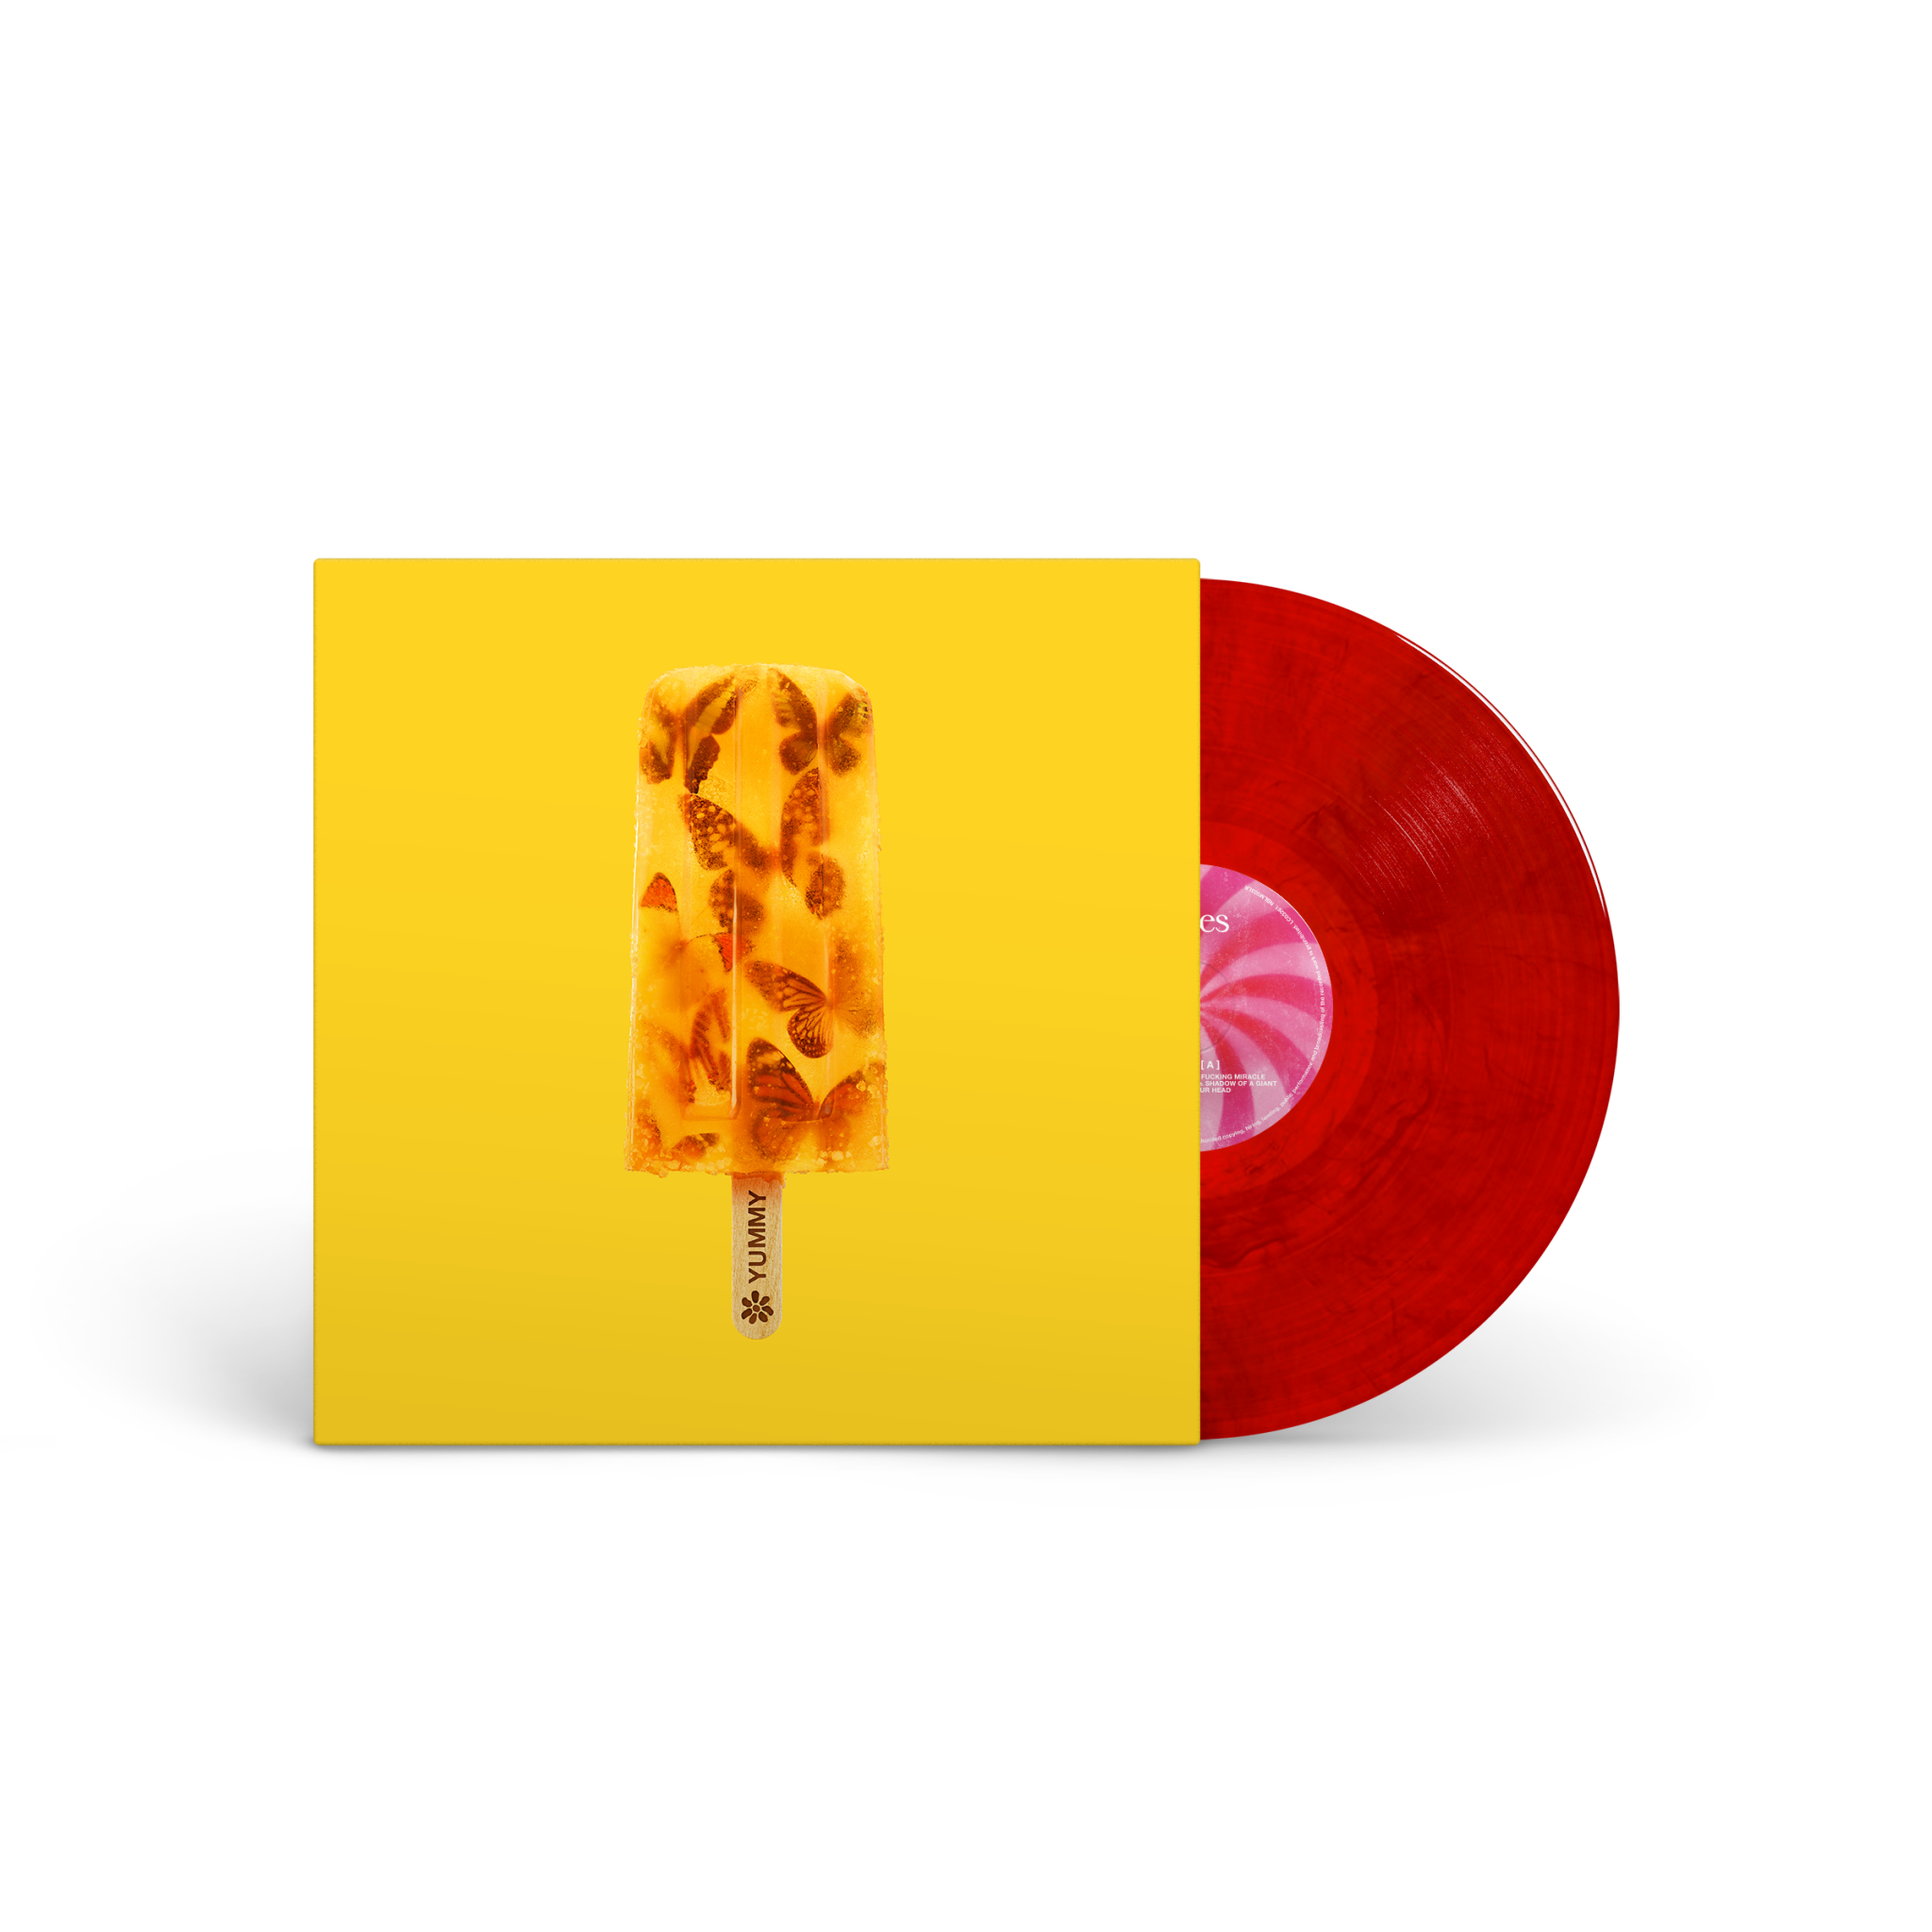 James - Yummy: Limited Red Marble Vinyl LP